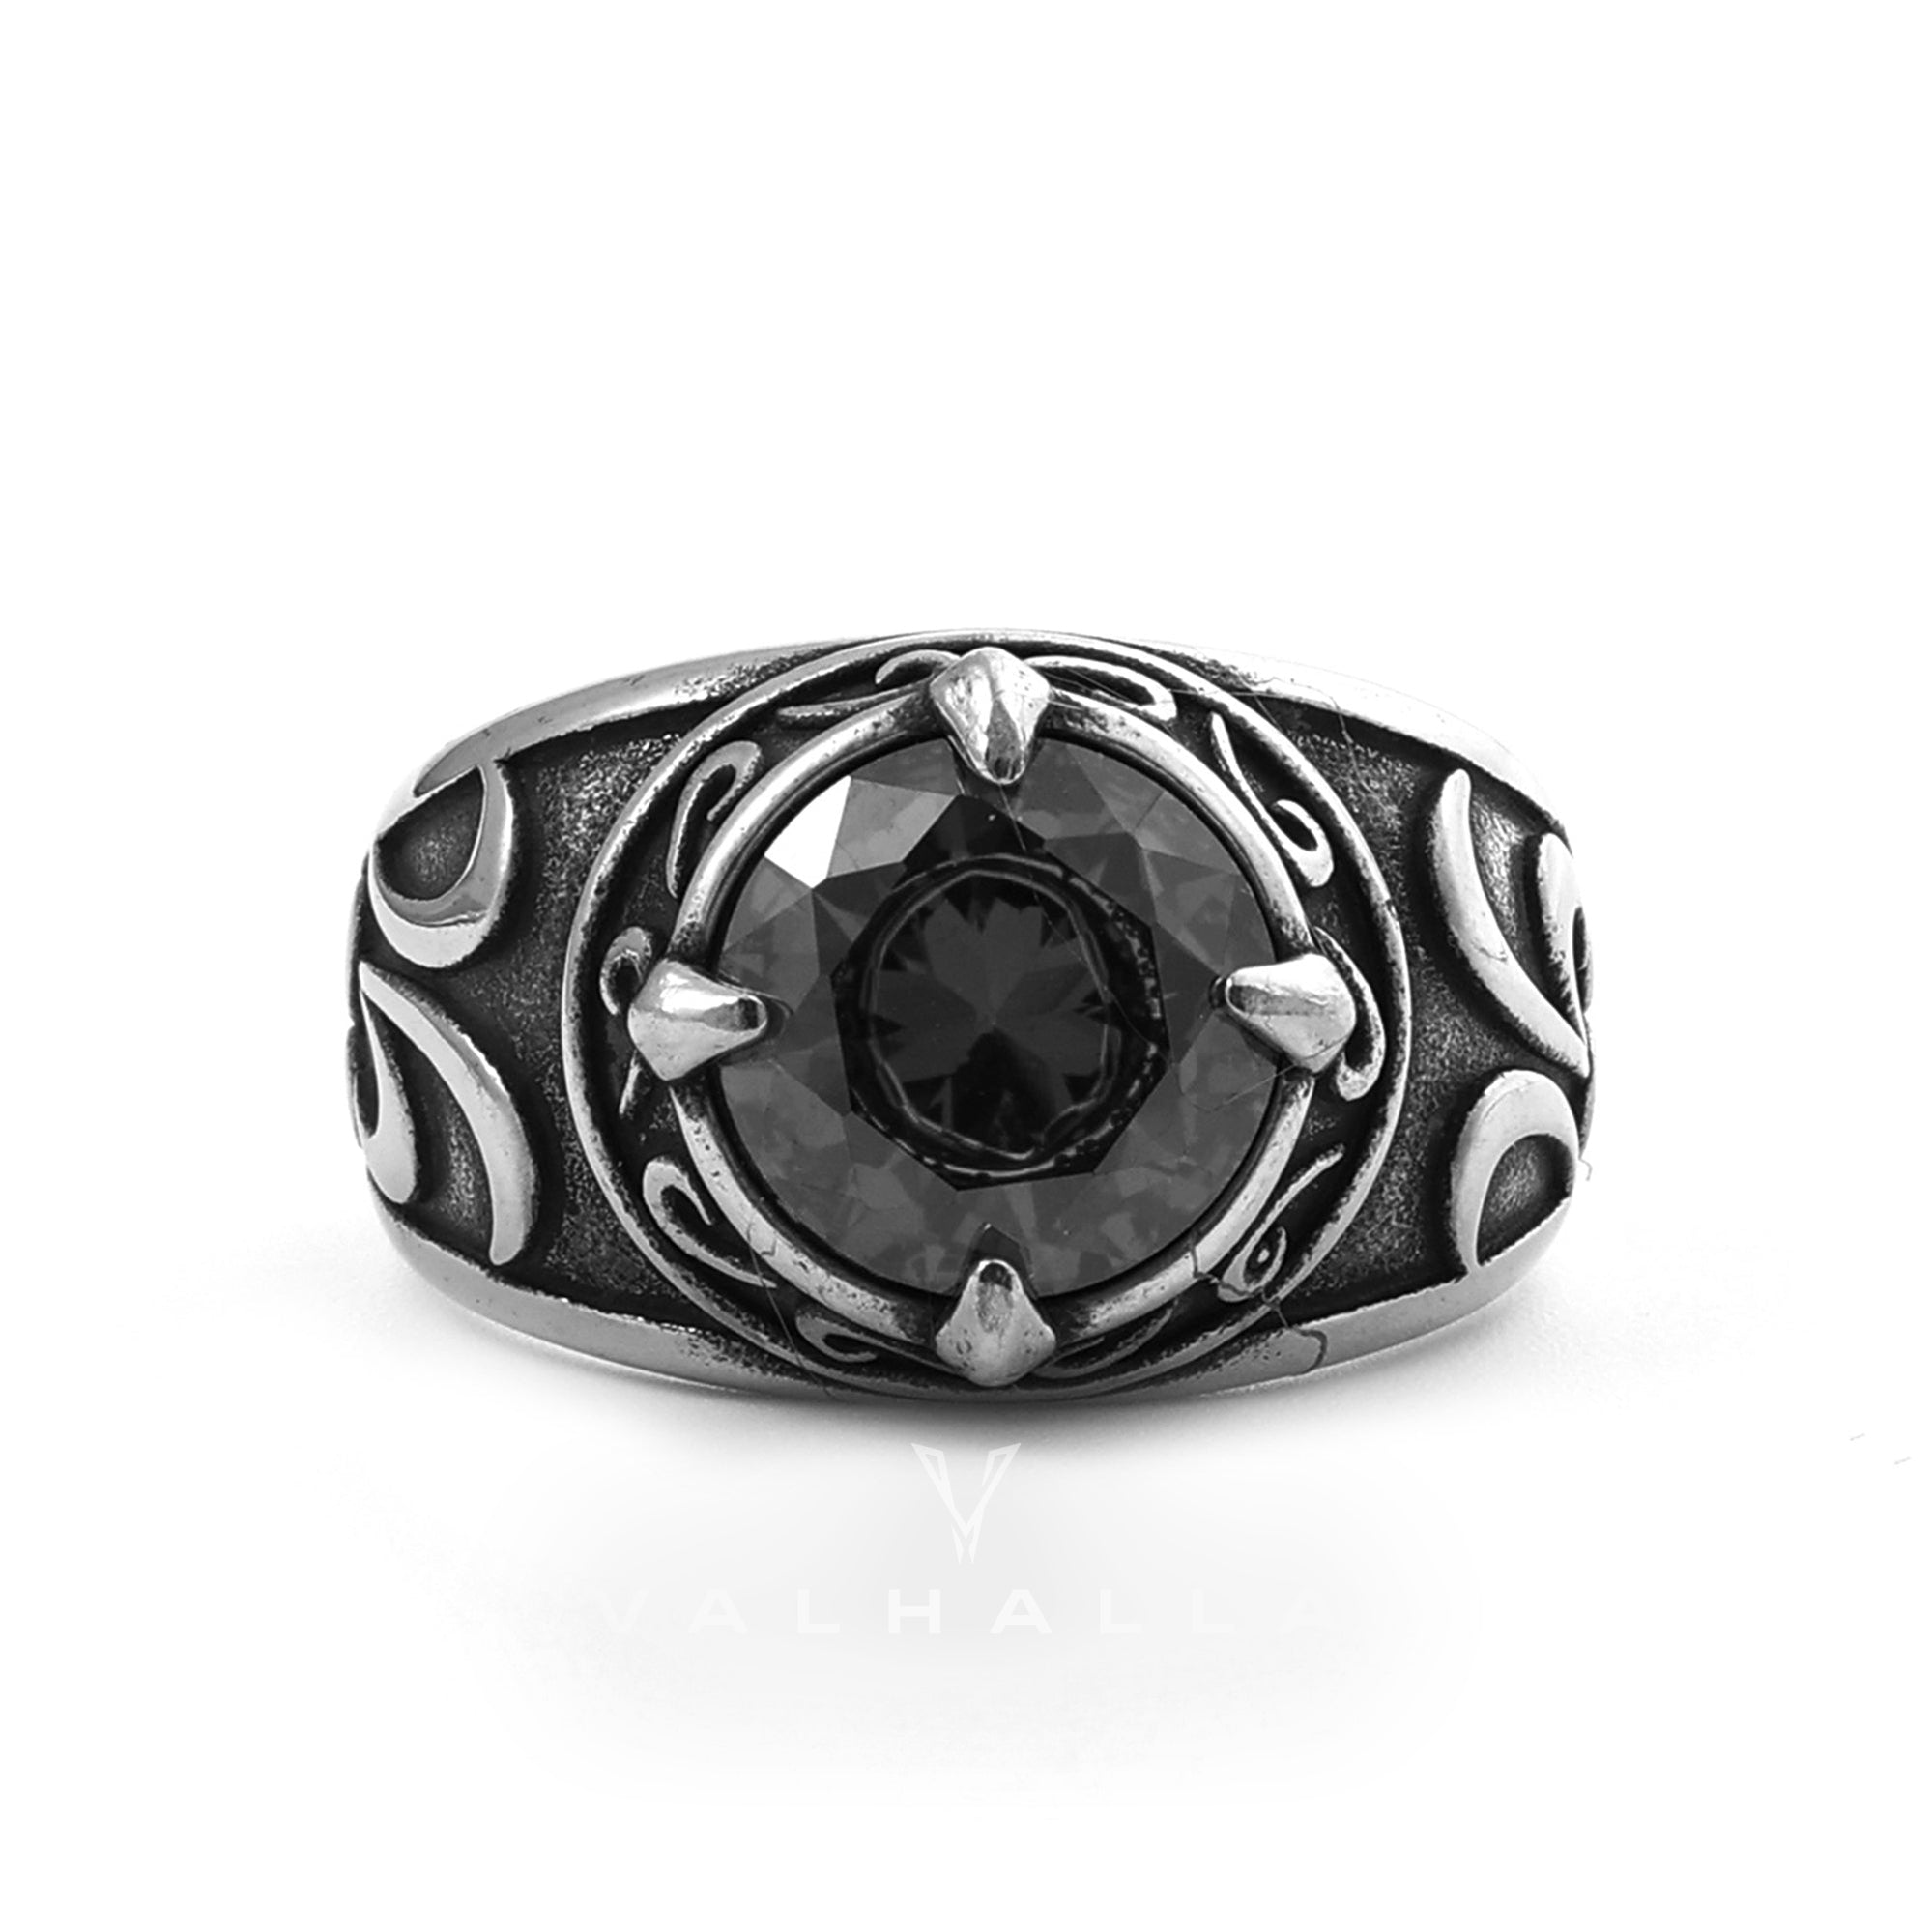 Handcrafted Stainless Steel Celtic Signet Ring With Central Stone